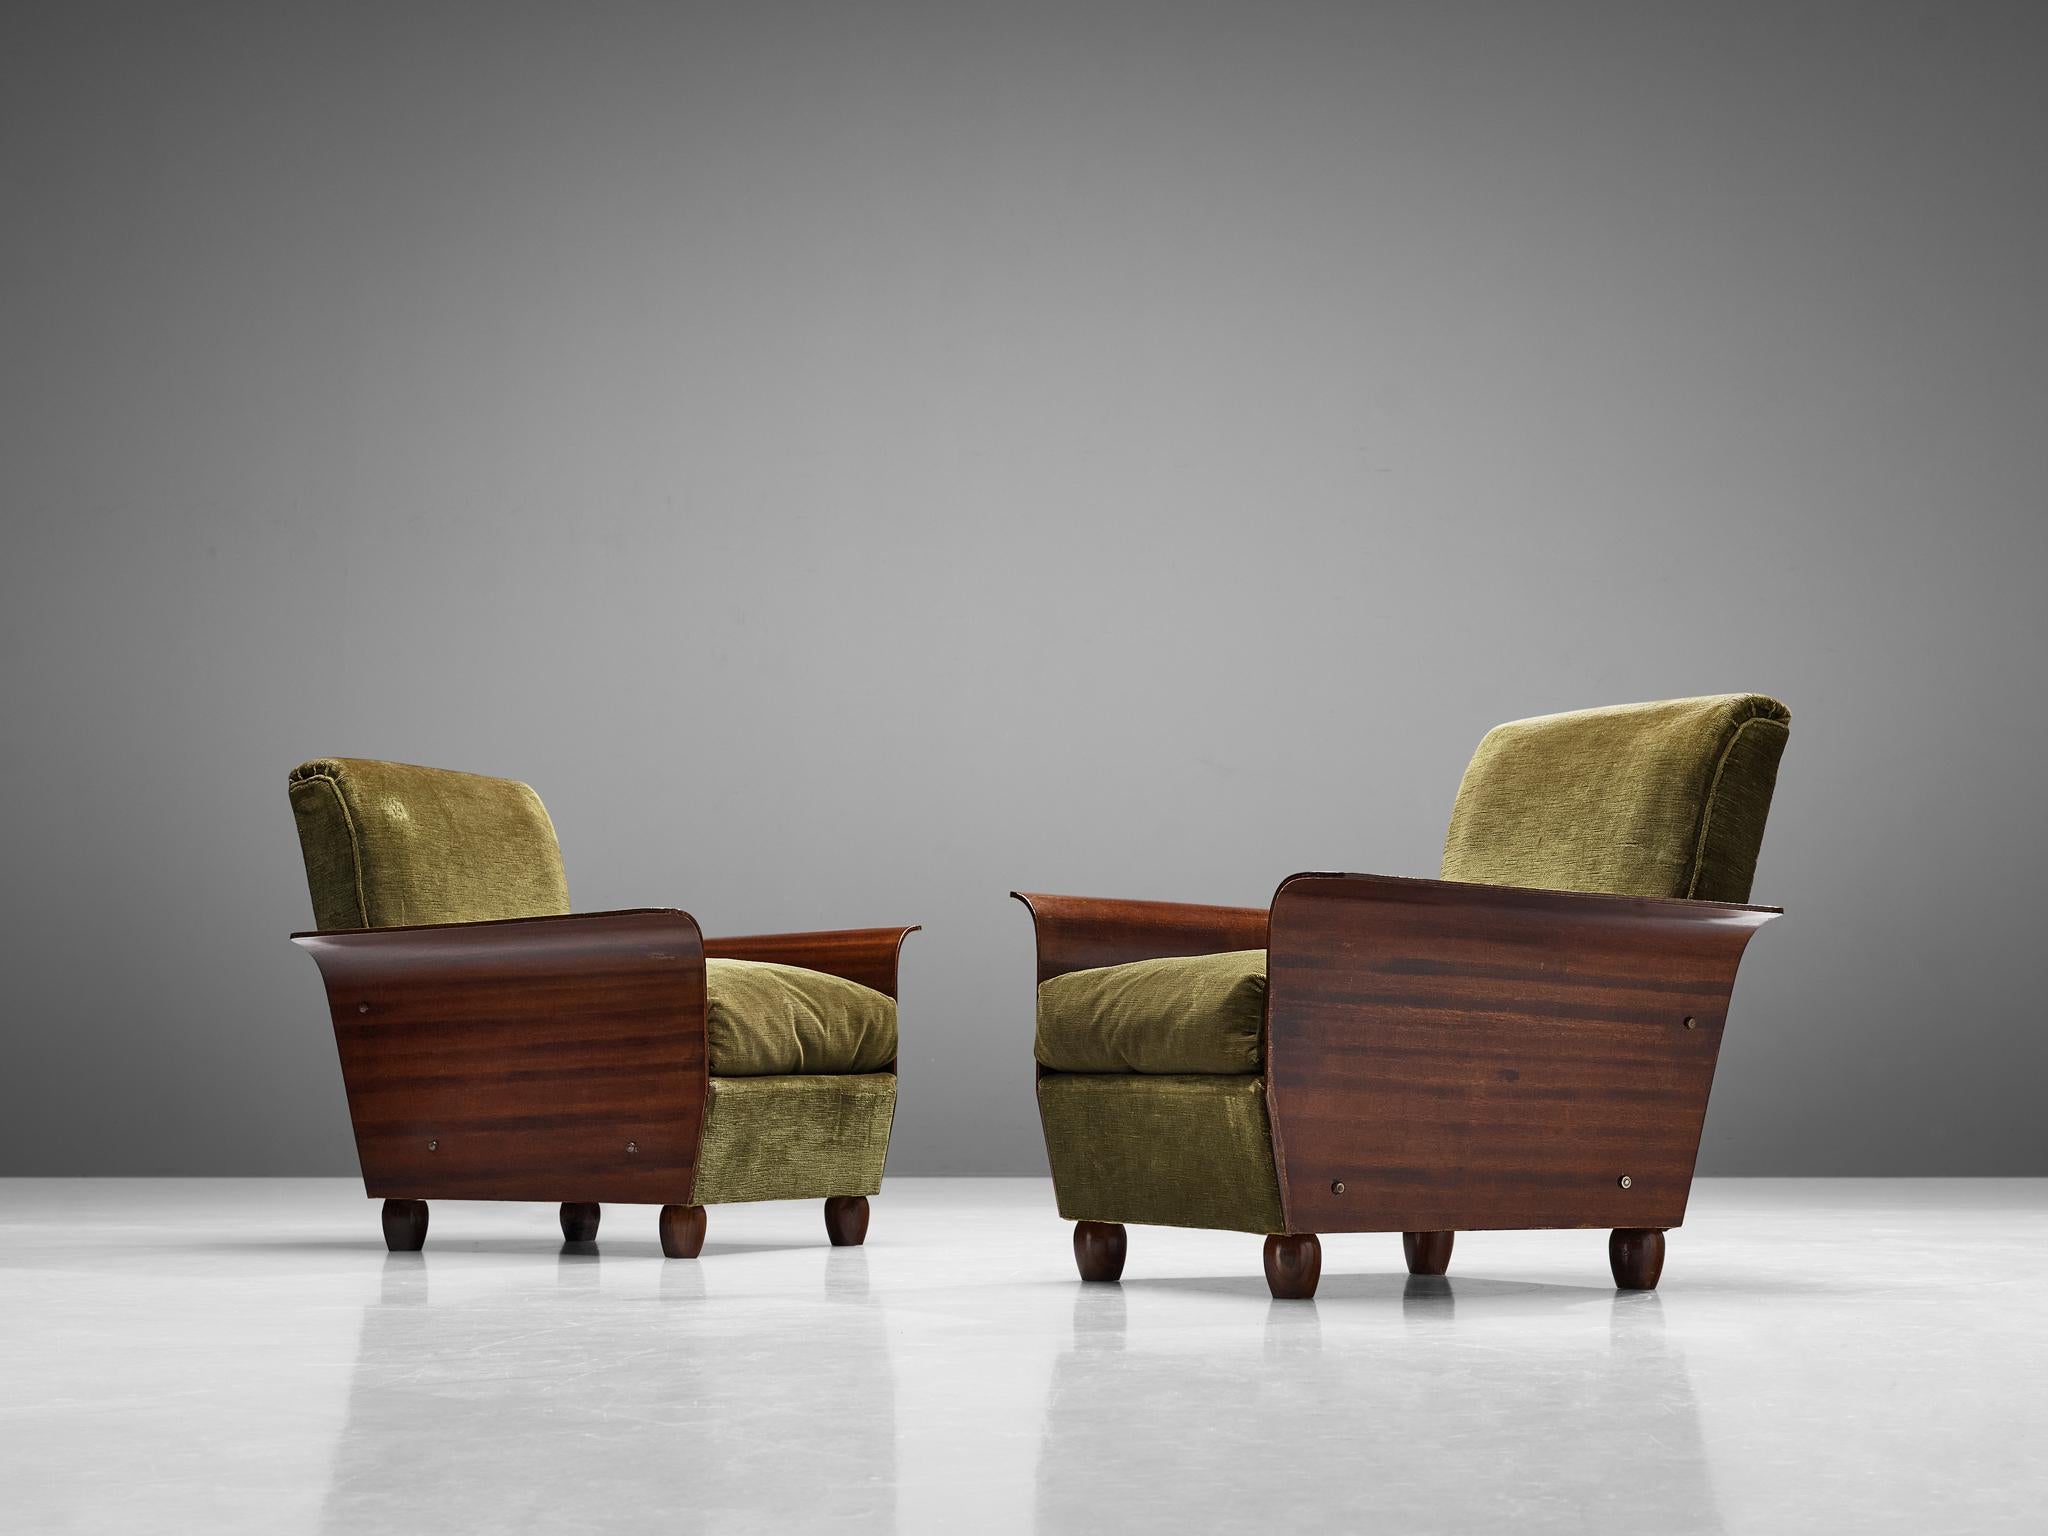 Pair of lounge chairs, velvet fabric, mahogany, Italy, 1950s

This beautifully shaped pair of lounge chairs of Italian origin comes with an expressive forest green colored upholstery that is pleasing to the eyes. This particular piece of furniture